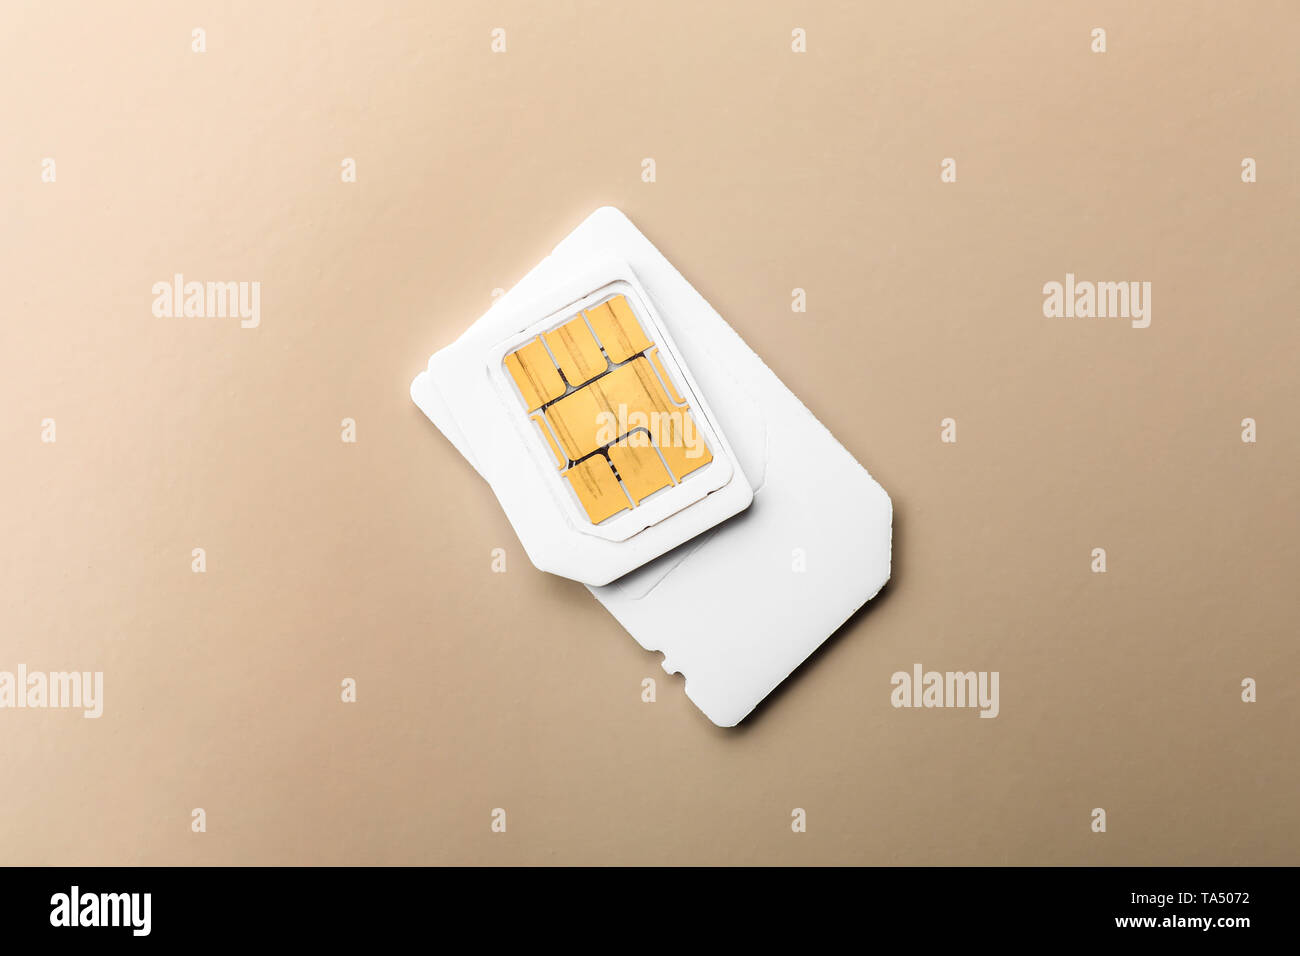 Sim card on color background Stock Photo